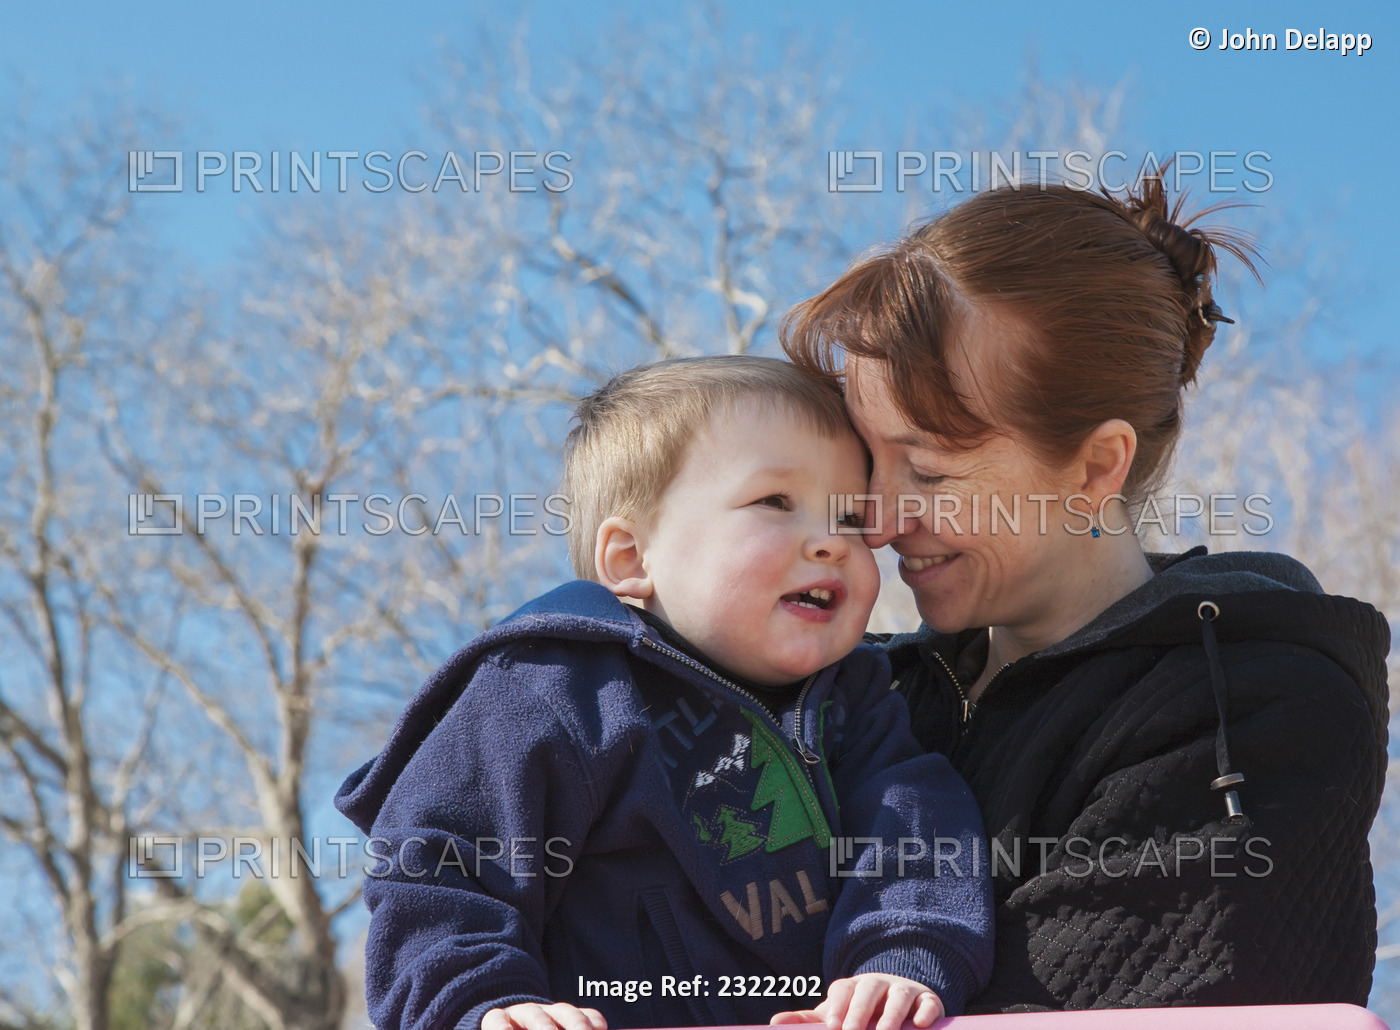 A mother with her young son; Willimantic, connecticut, united states of america